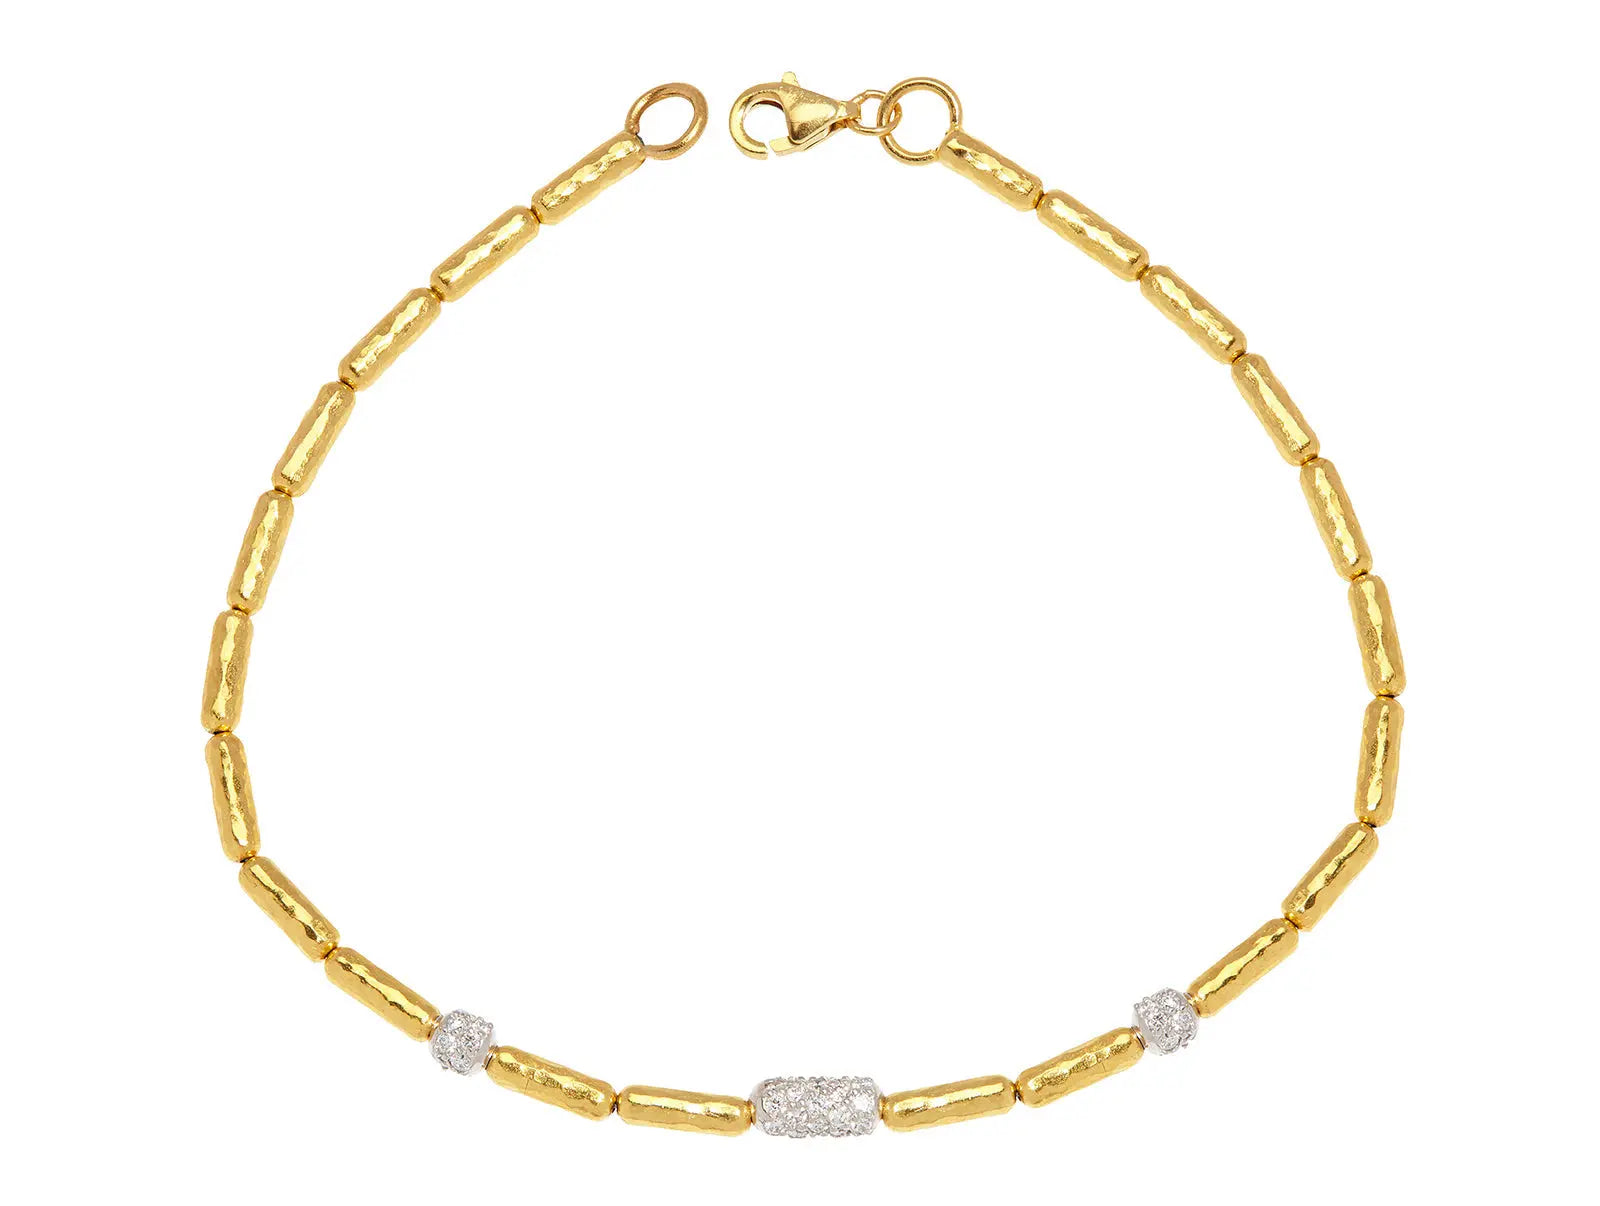 Gurhan Single Strand Bracelet from the Vertigo Collection. The bracelet is set in 24k yellow gold with the clasp in 22k yellow gold. The pave diamonds are set in 18k white gold. 3 pave diamonds in total with .50 cttw of diamonds. The length of the bracelet is 7.25 inches.